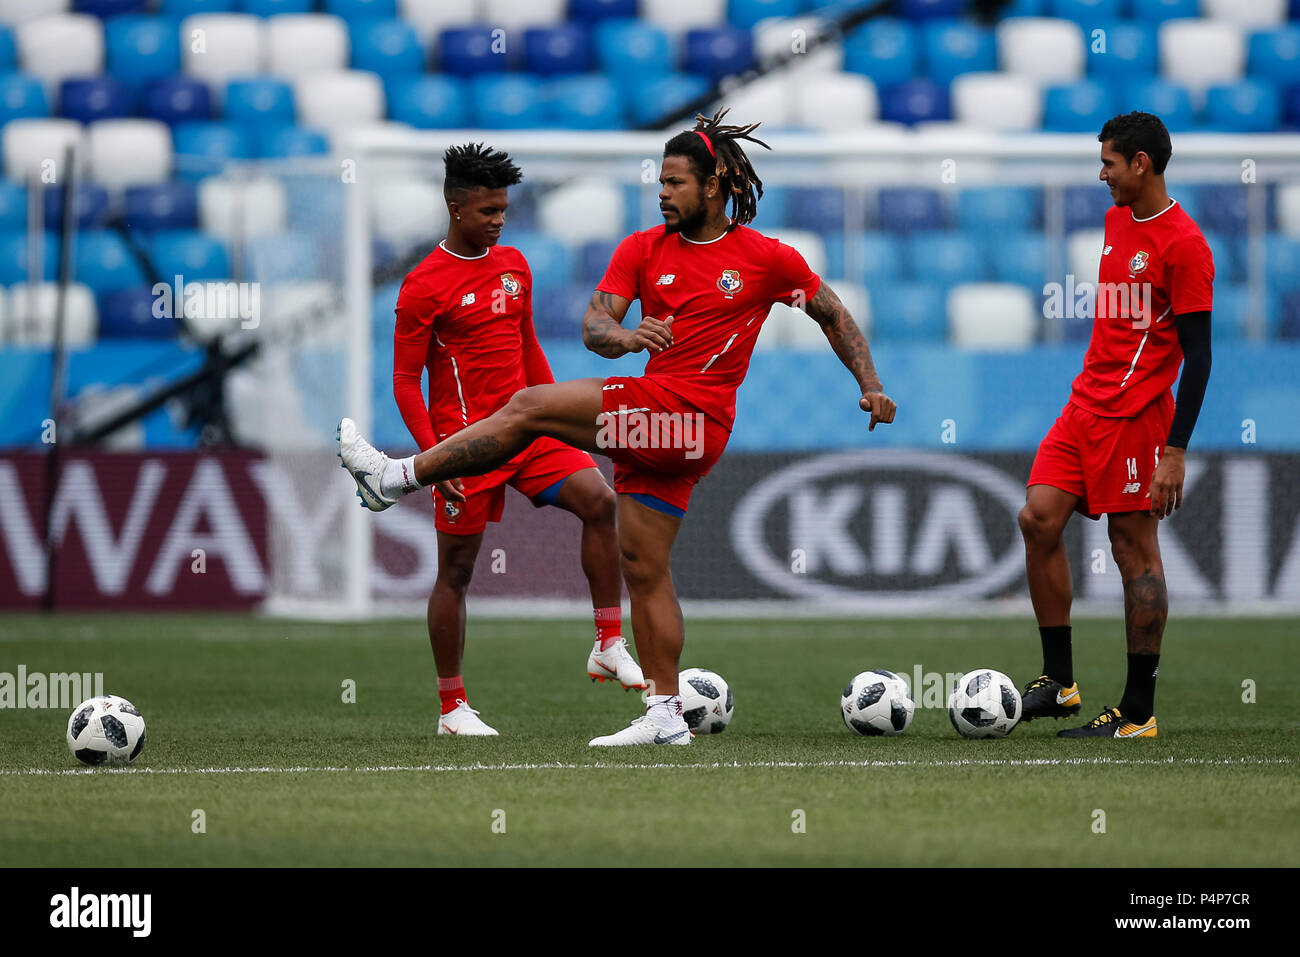 Nizhny Novgorod, Russia. 23rd June 2018. Roman Torres of Panama during a Panama training session, prior to their 2018 FIFA World Cup Group G match against England, at Nizhny Novgorod Stadium on June 23rd 2018 in Nizhny Novgorod, Russia. (Photo by Daniel Chesterton/phcimages.com) Credit: PHC Images/Alamy Live News Stock Photo